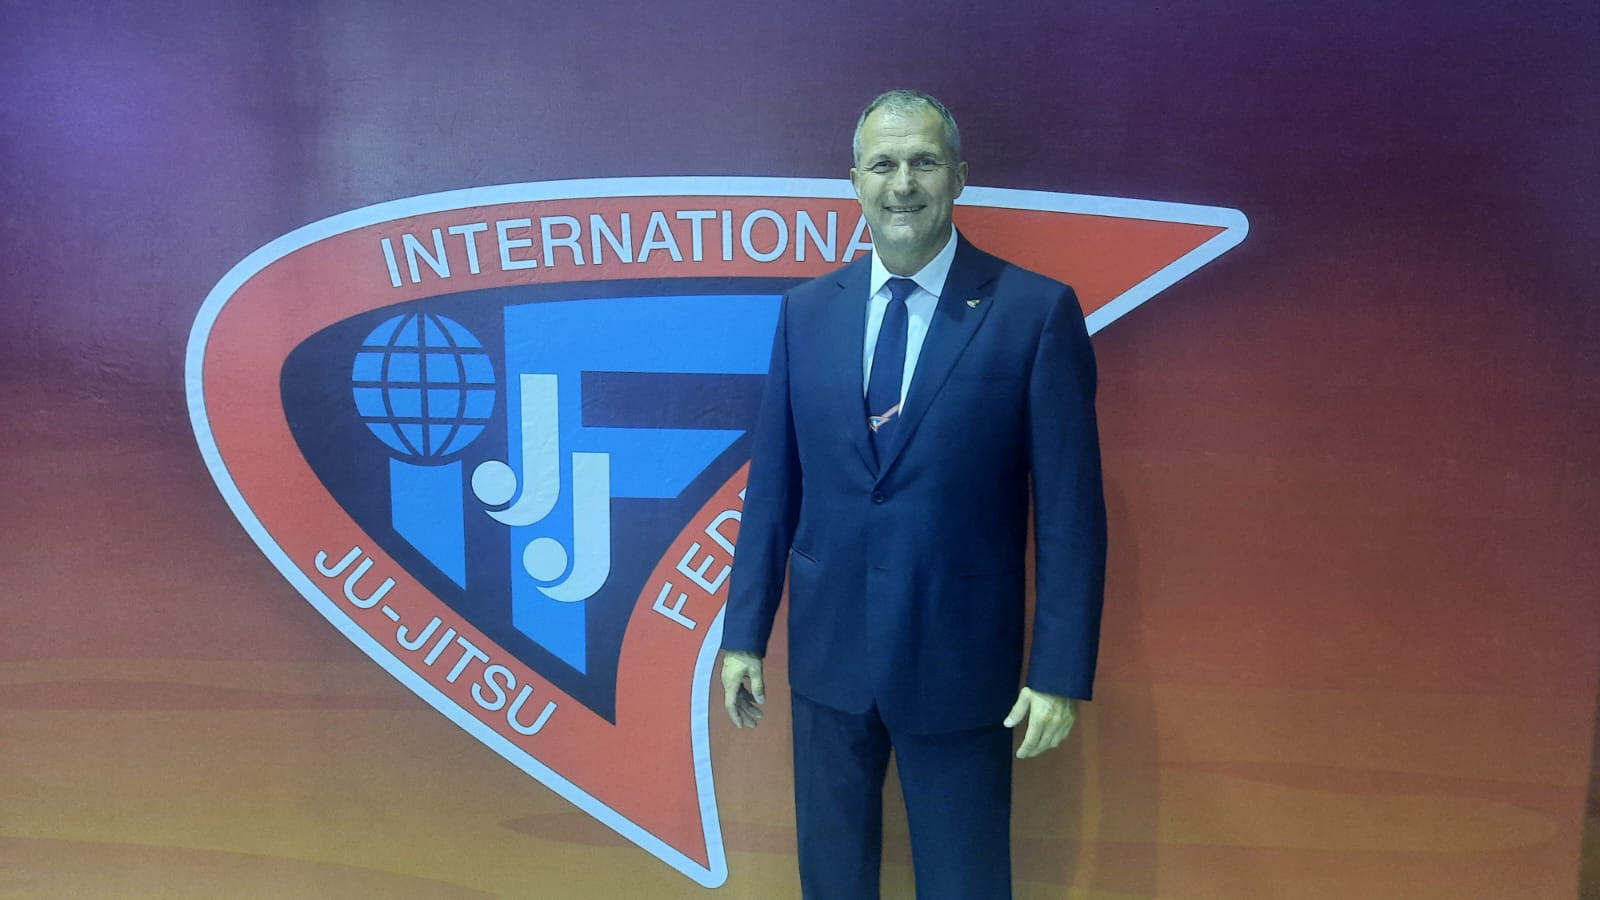 Joachim Thumfart says there is a possibility of Russia competing at the Ju-Jitsu Asian Championships ©ITG